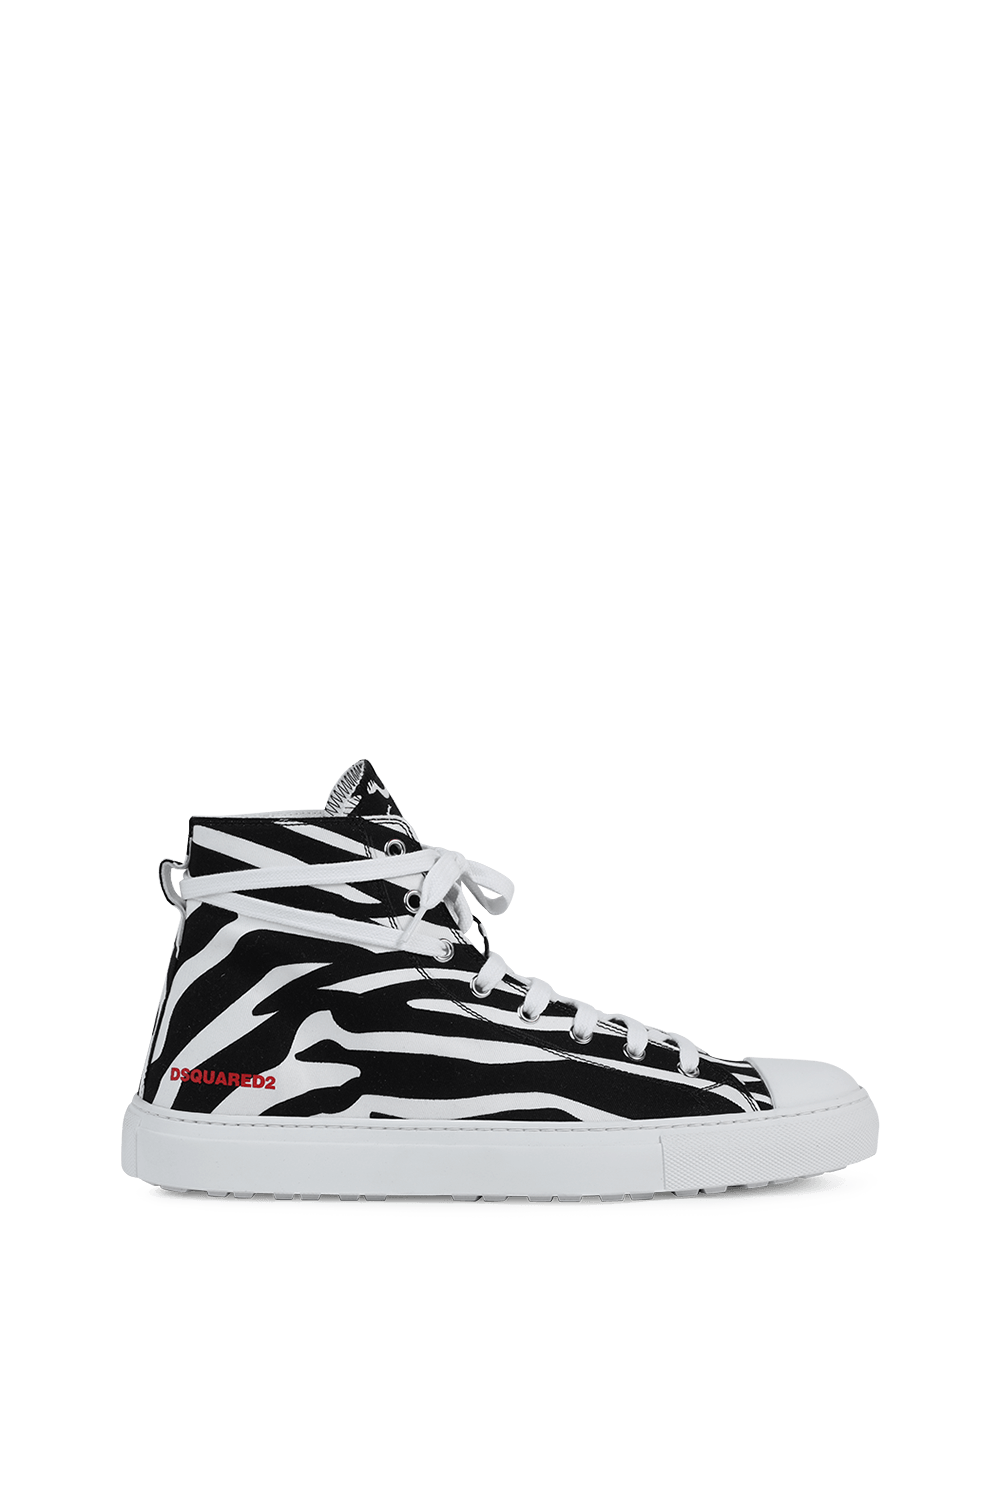 Zebra High Sneakers in Black and White DSQUARED2